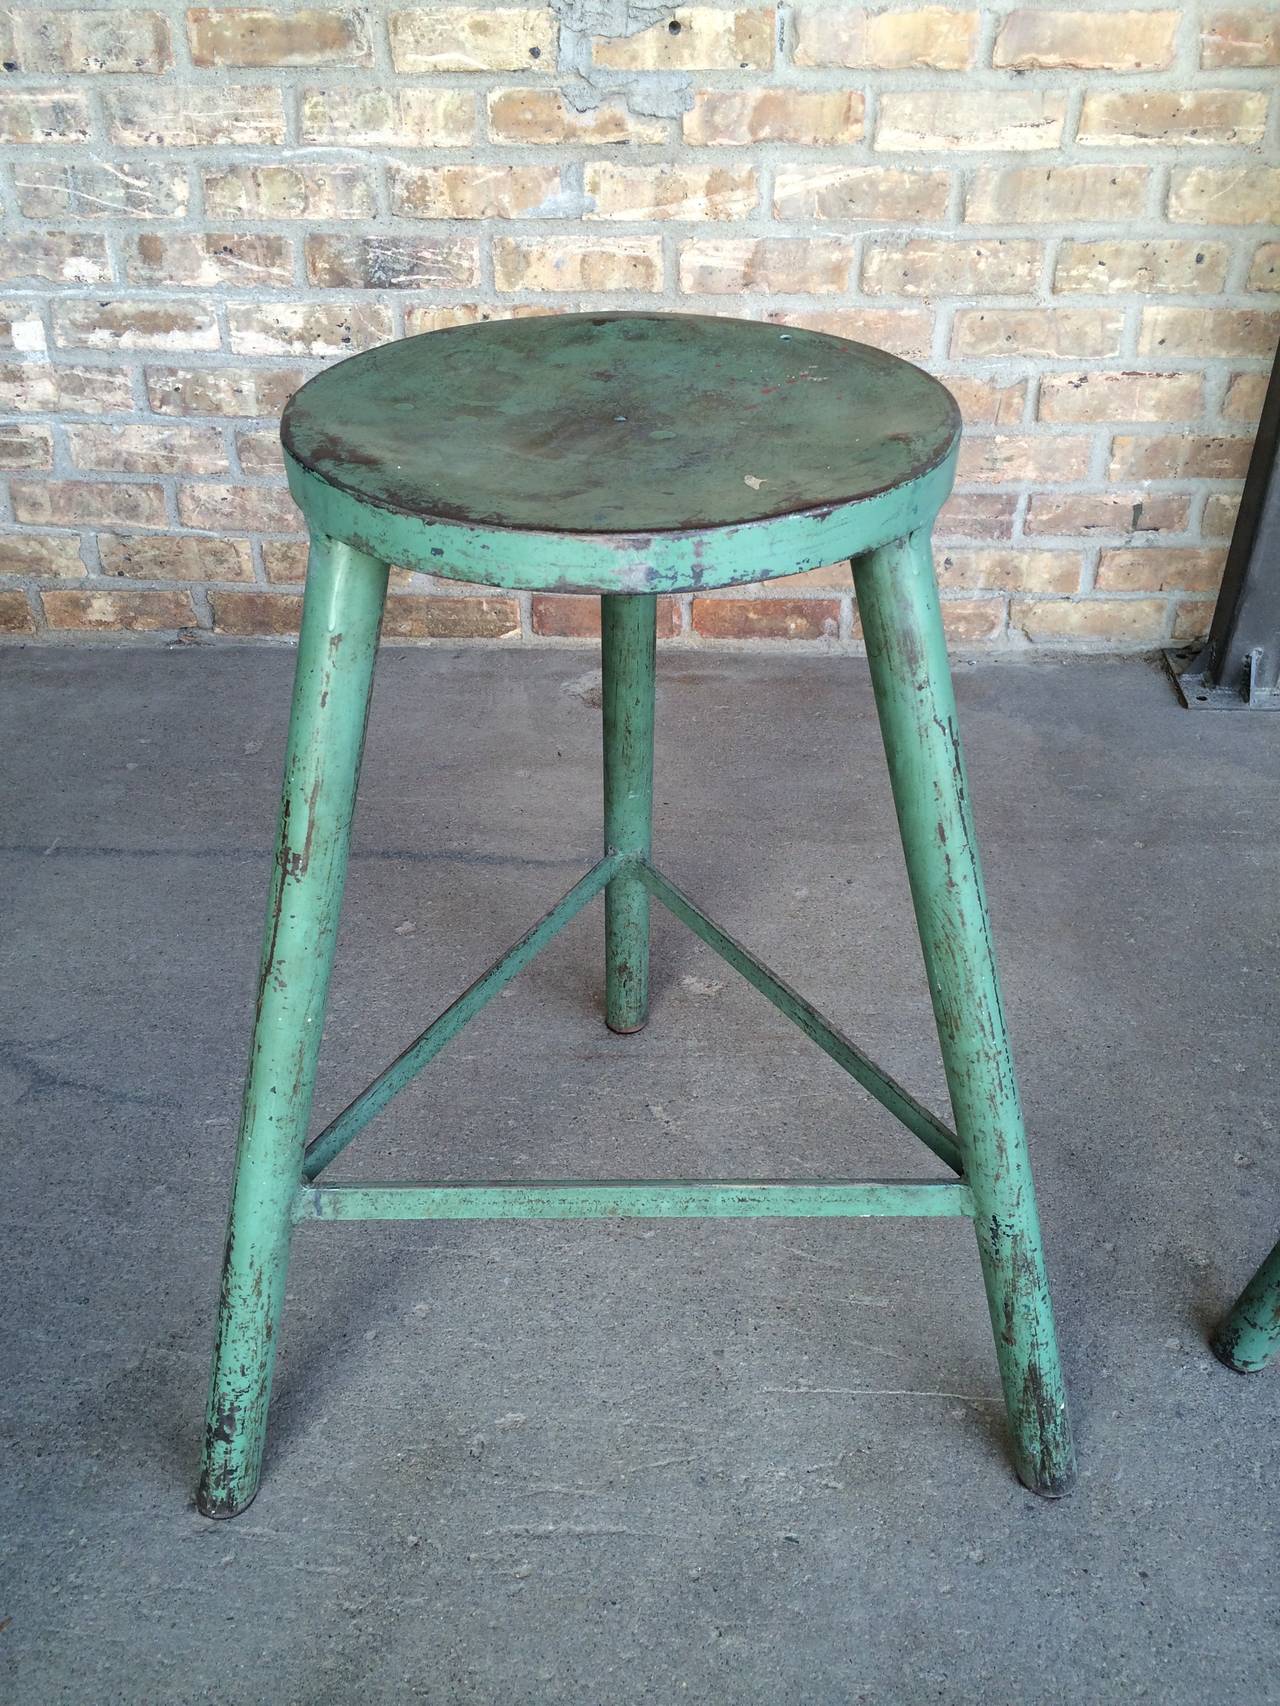 Vintage industrial iron metal stools with original paint and fabulous patina.